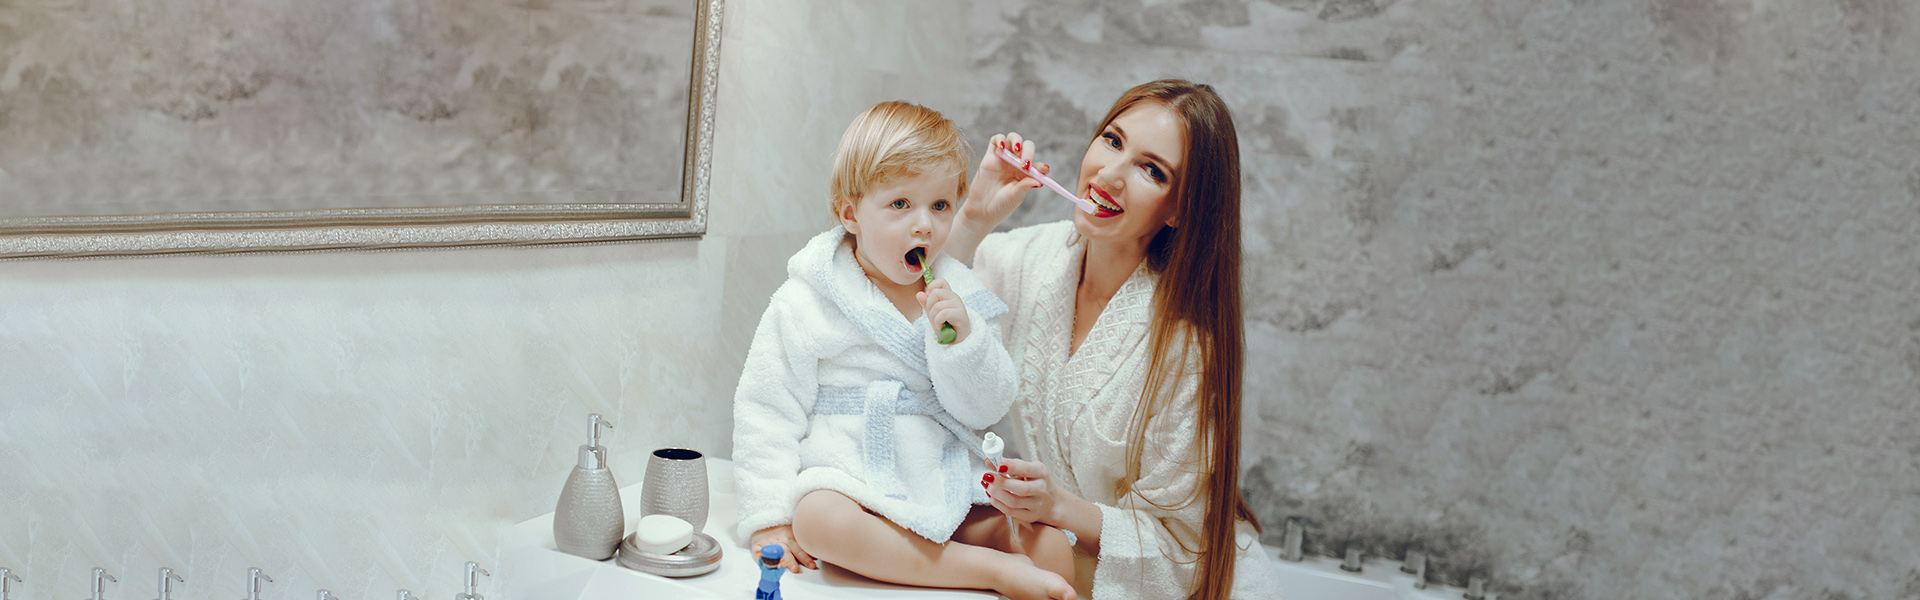 Do Dentists Recommend Fluoride Toothpaste For Babies & Toddlers?